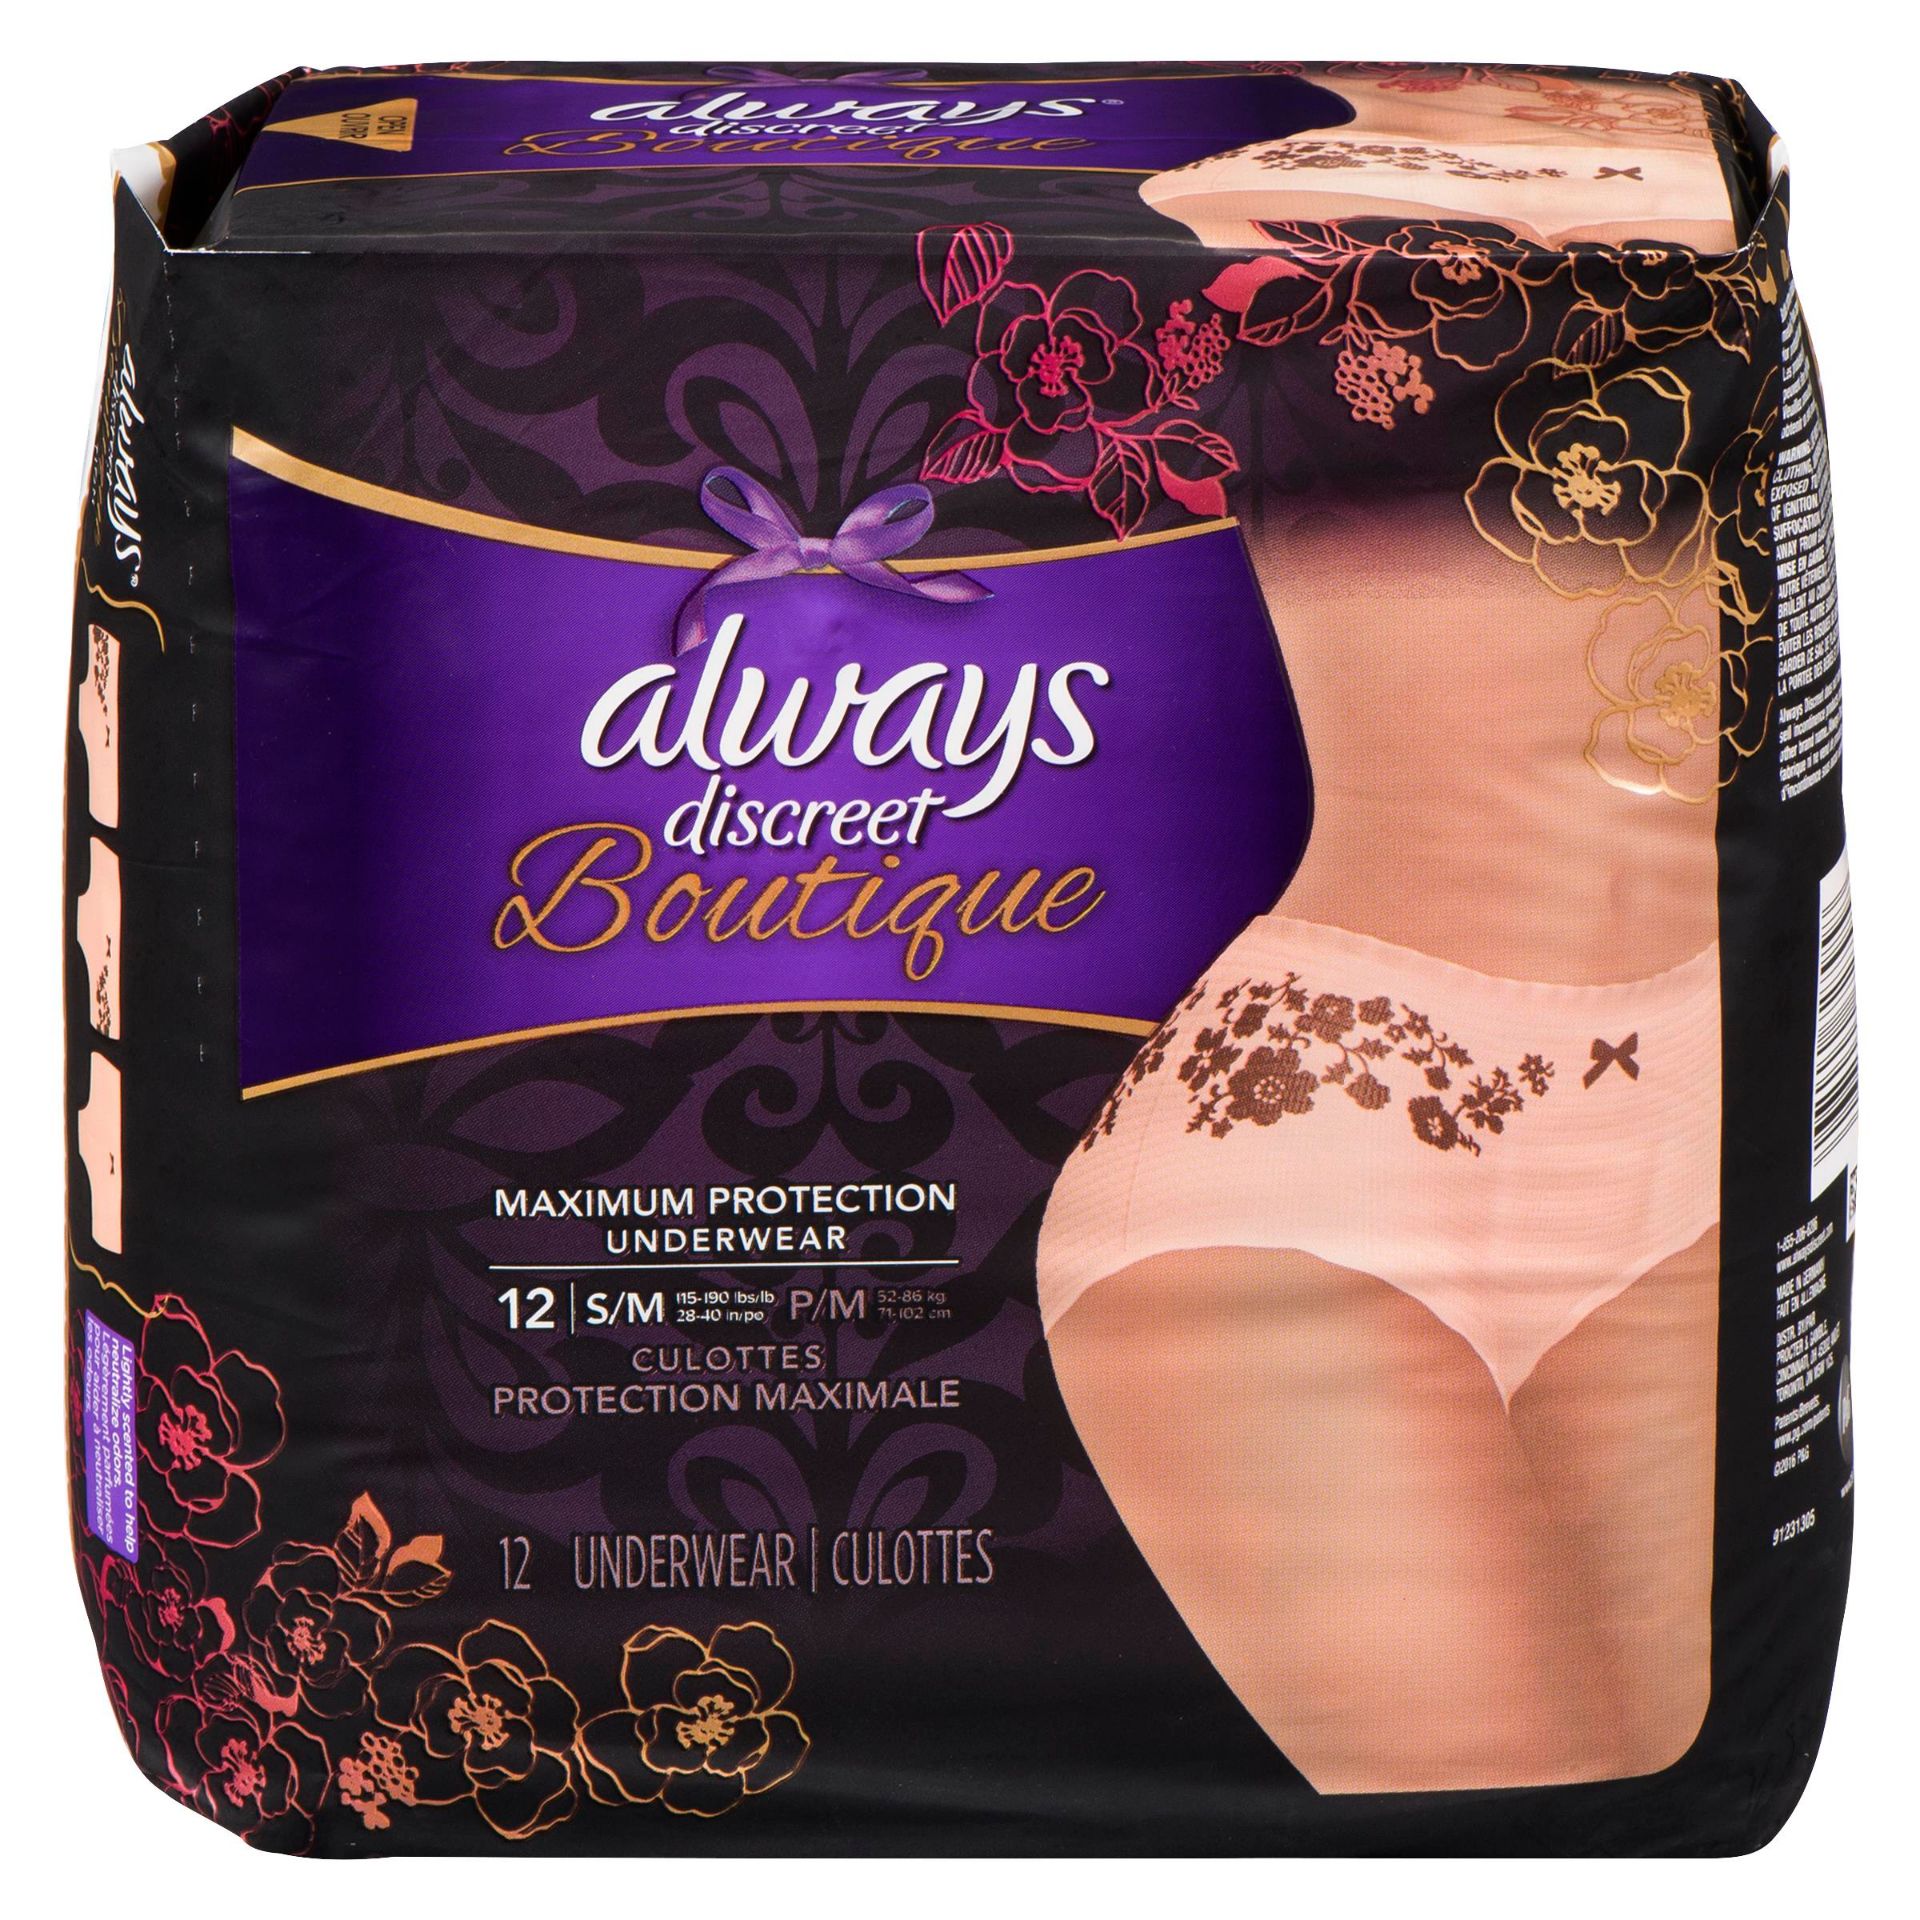 Always Discreet Max Protection Underwear, L - 17 Count